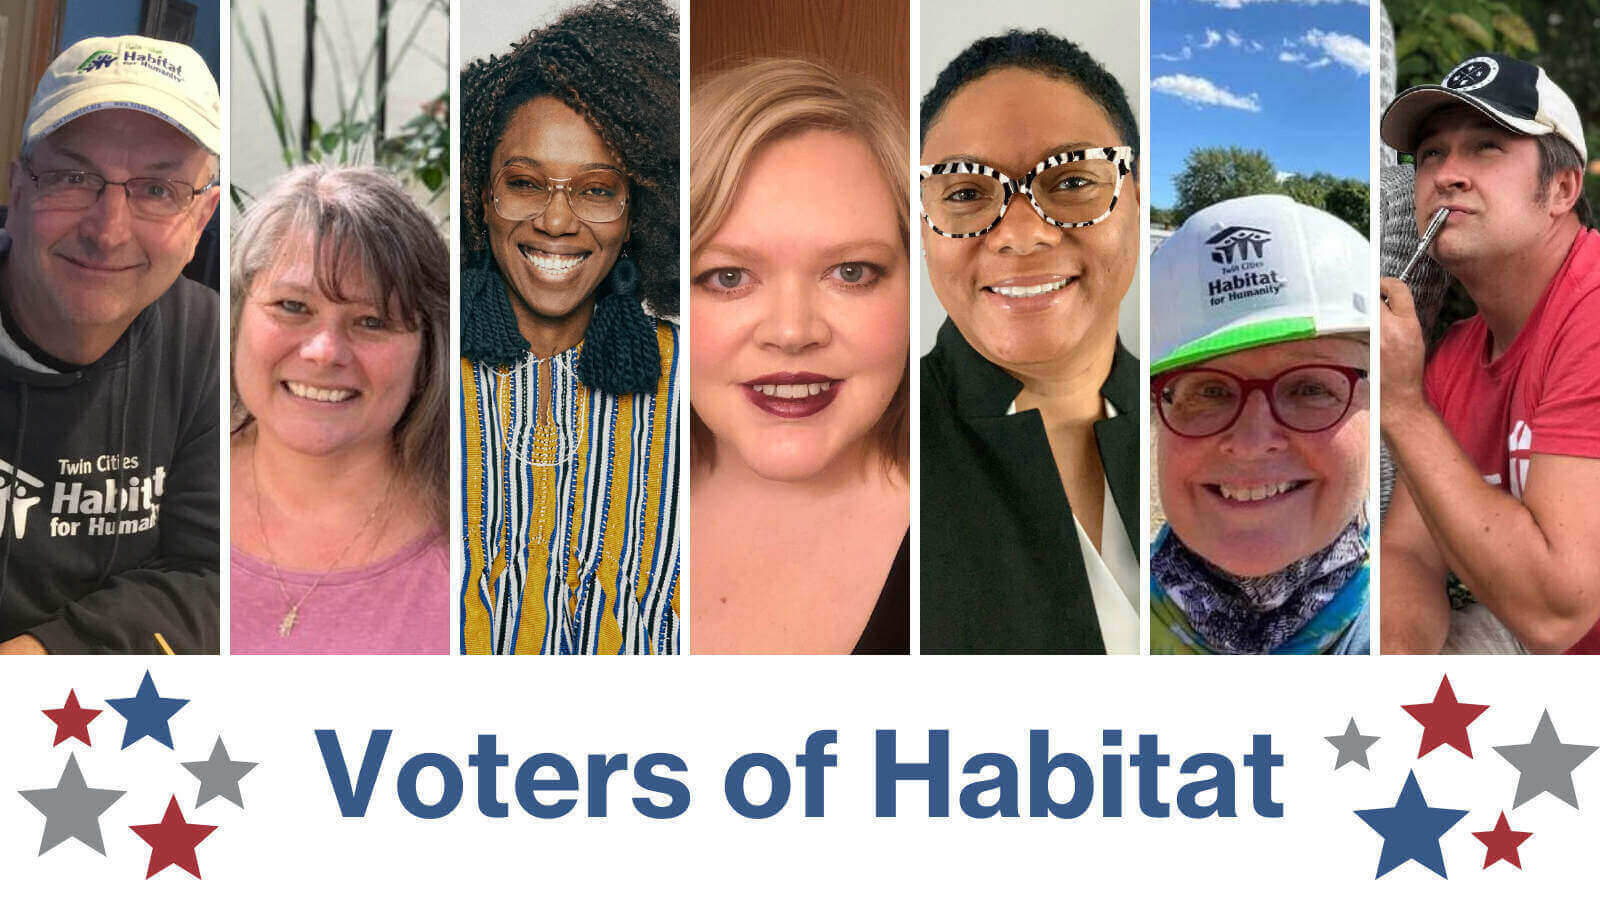 Gray, blue, and red stars bracket the text "Voters of Habitat" in a white bar at the bottom of the main image. Featured images of this blog's Voters of Habitat. From left to right: Lou Cristan, Juanita Jensen, Ethelind Kaba, Bethany Nagan, Shereese Turner, Karen Welle, and Skip Schmall.